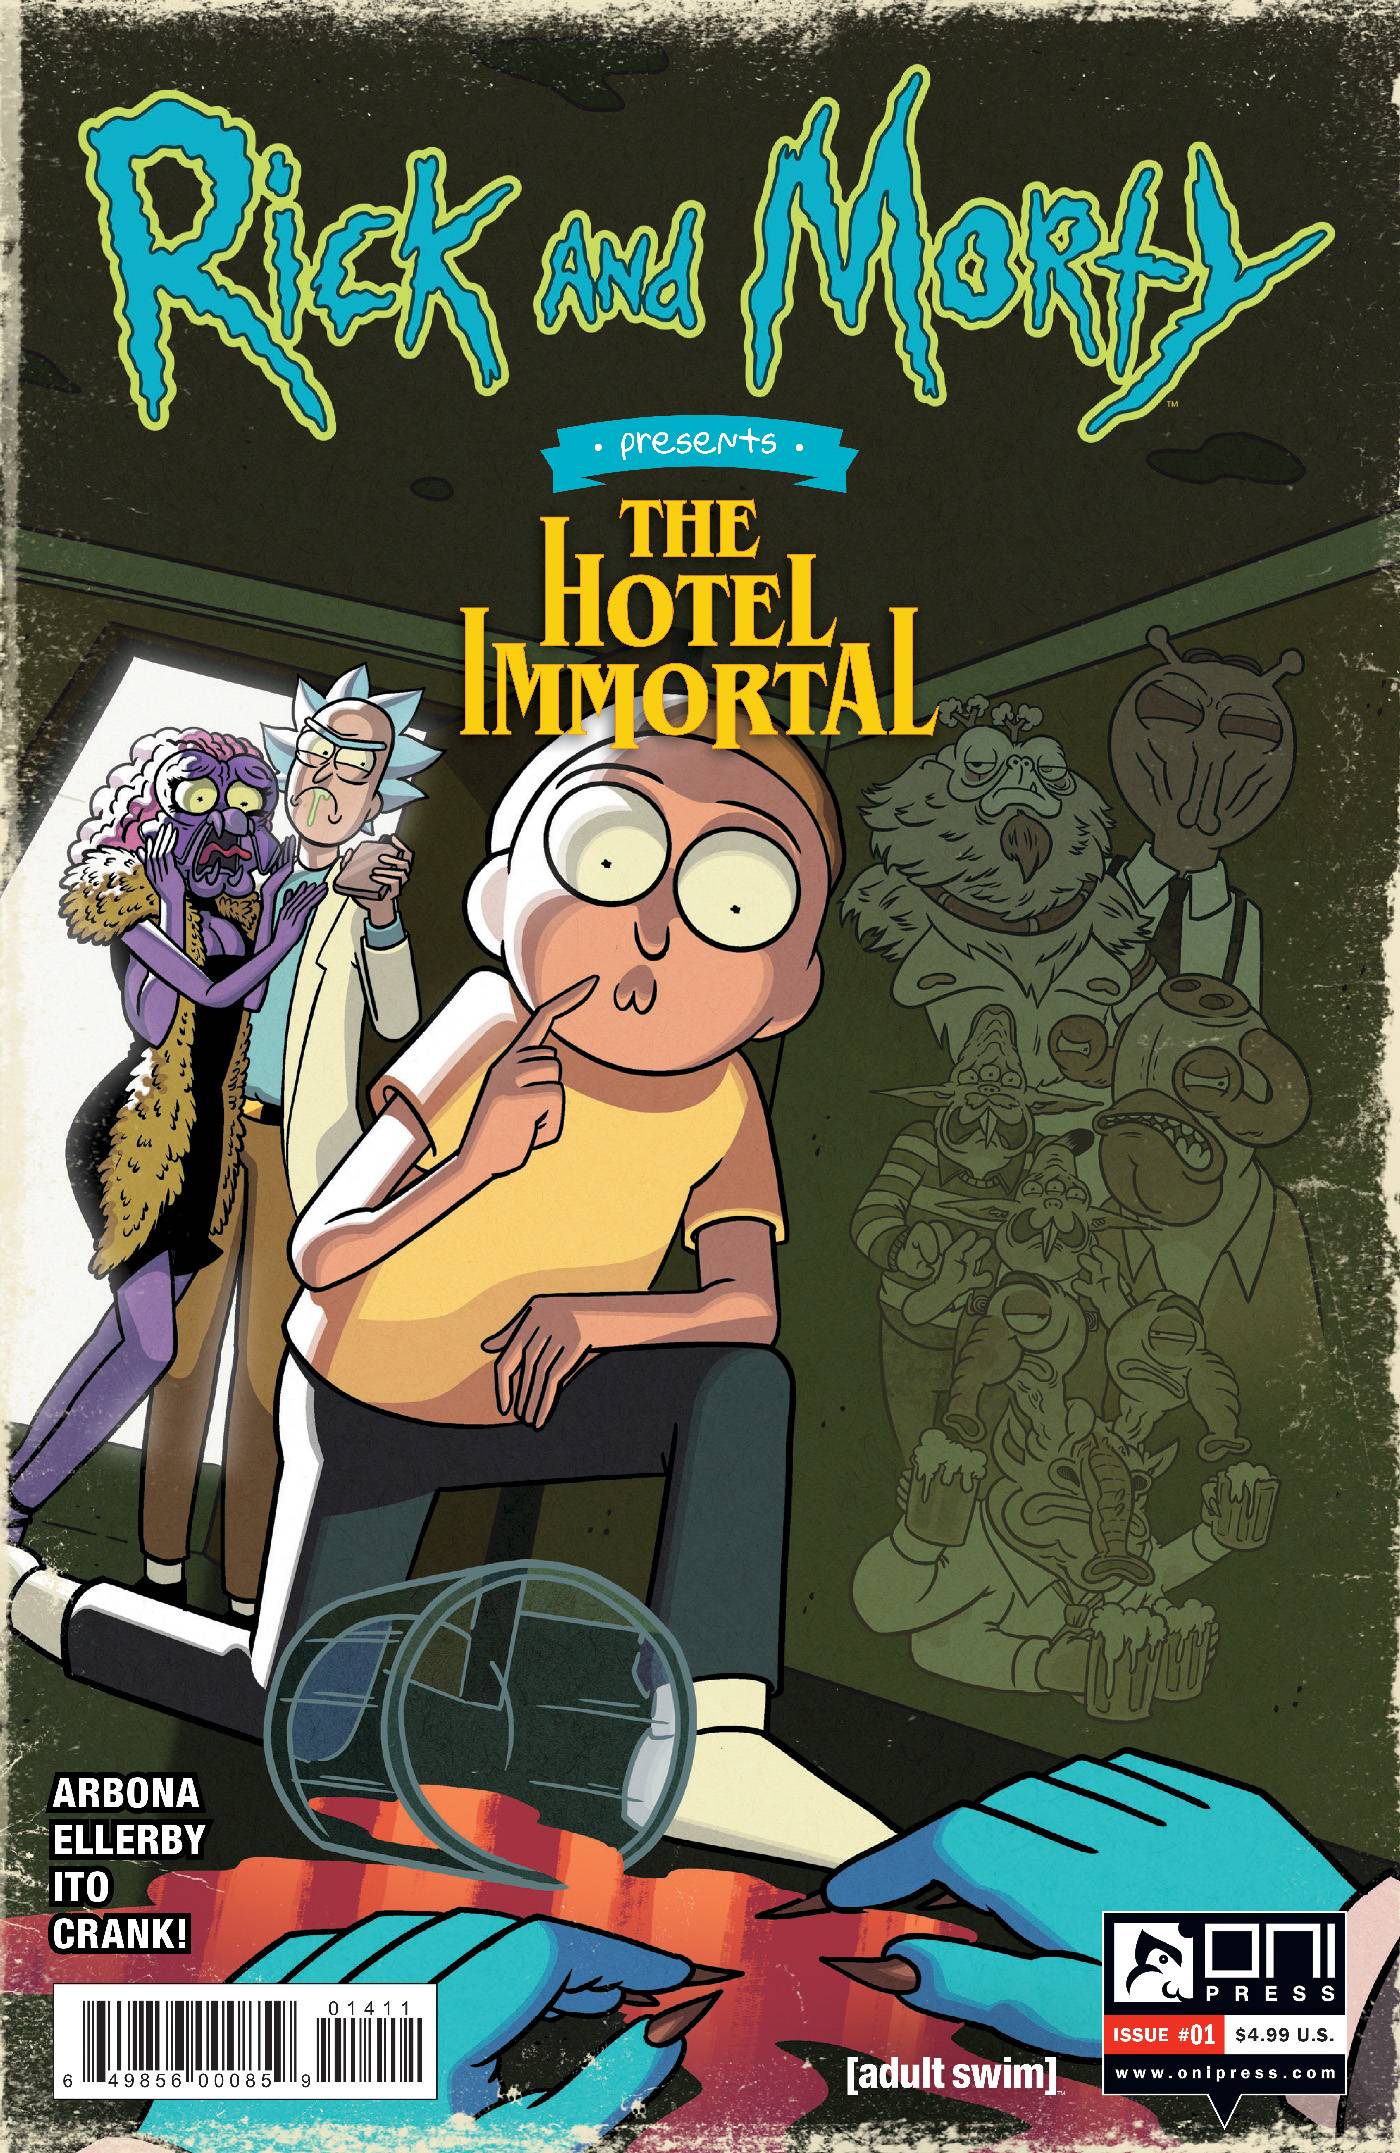 Rick and Morty Presents Hotel Immortal #1 Cover A Ellerby (Mature)